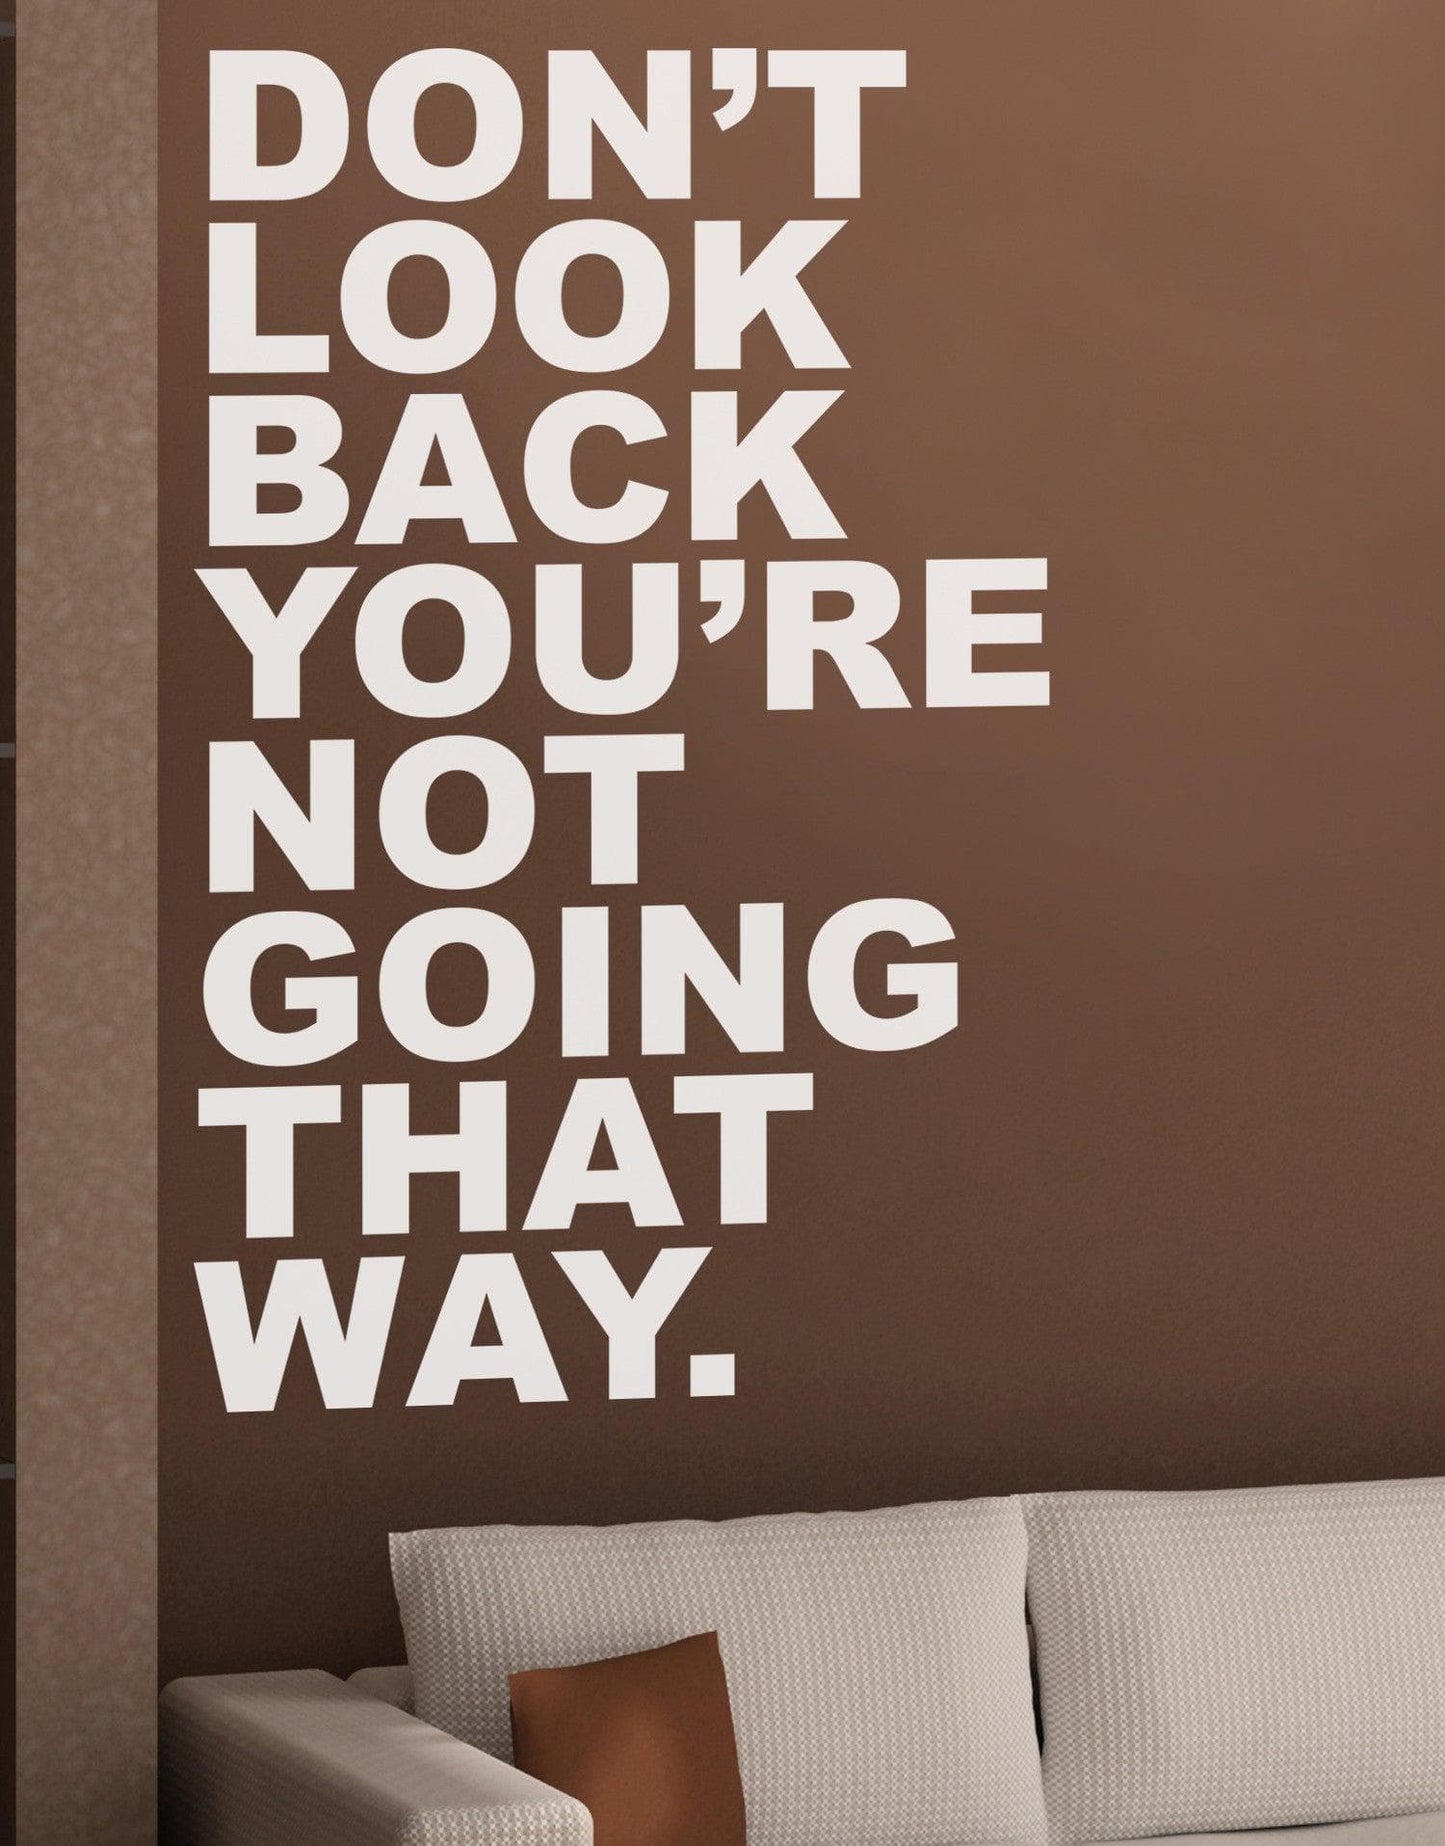 Motivational Quotes - Don’t Look Back You’re Not Going That Way #6053